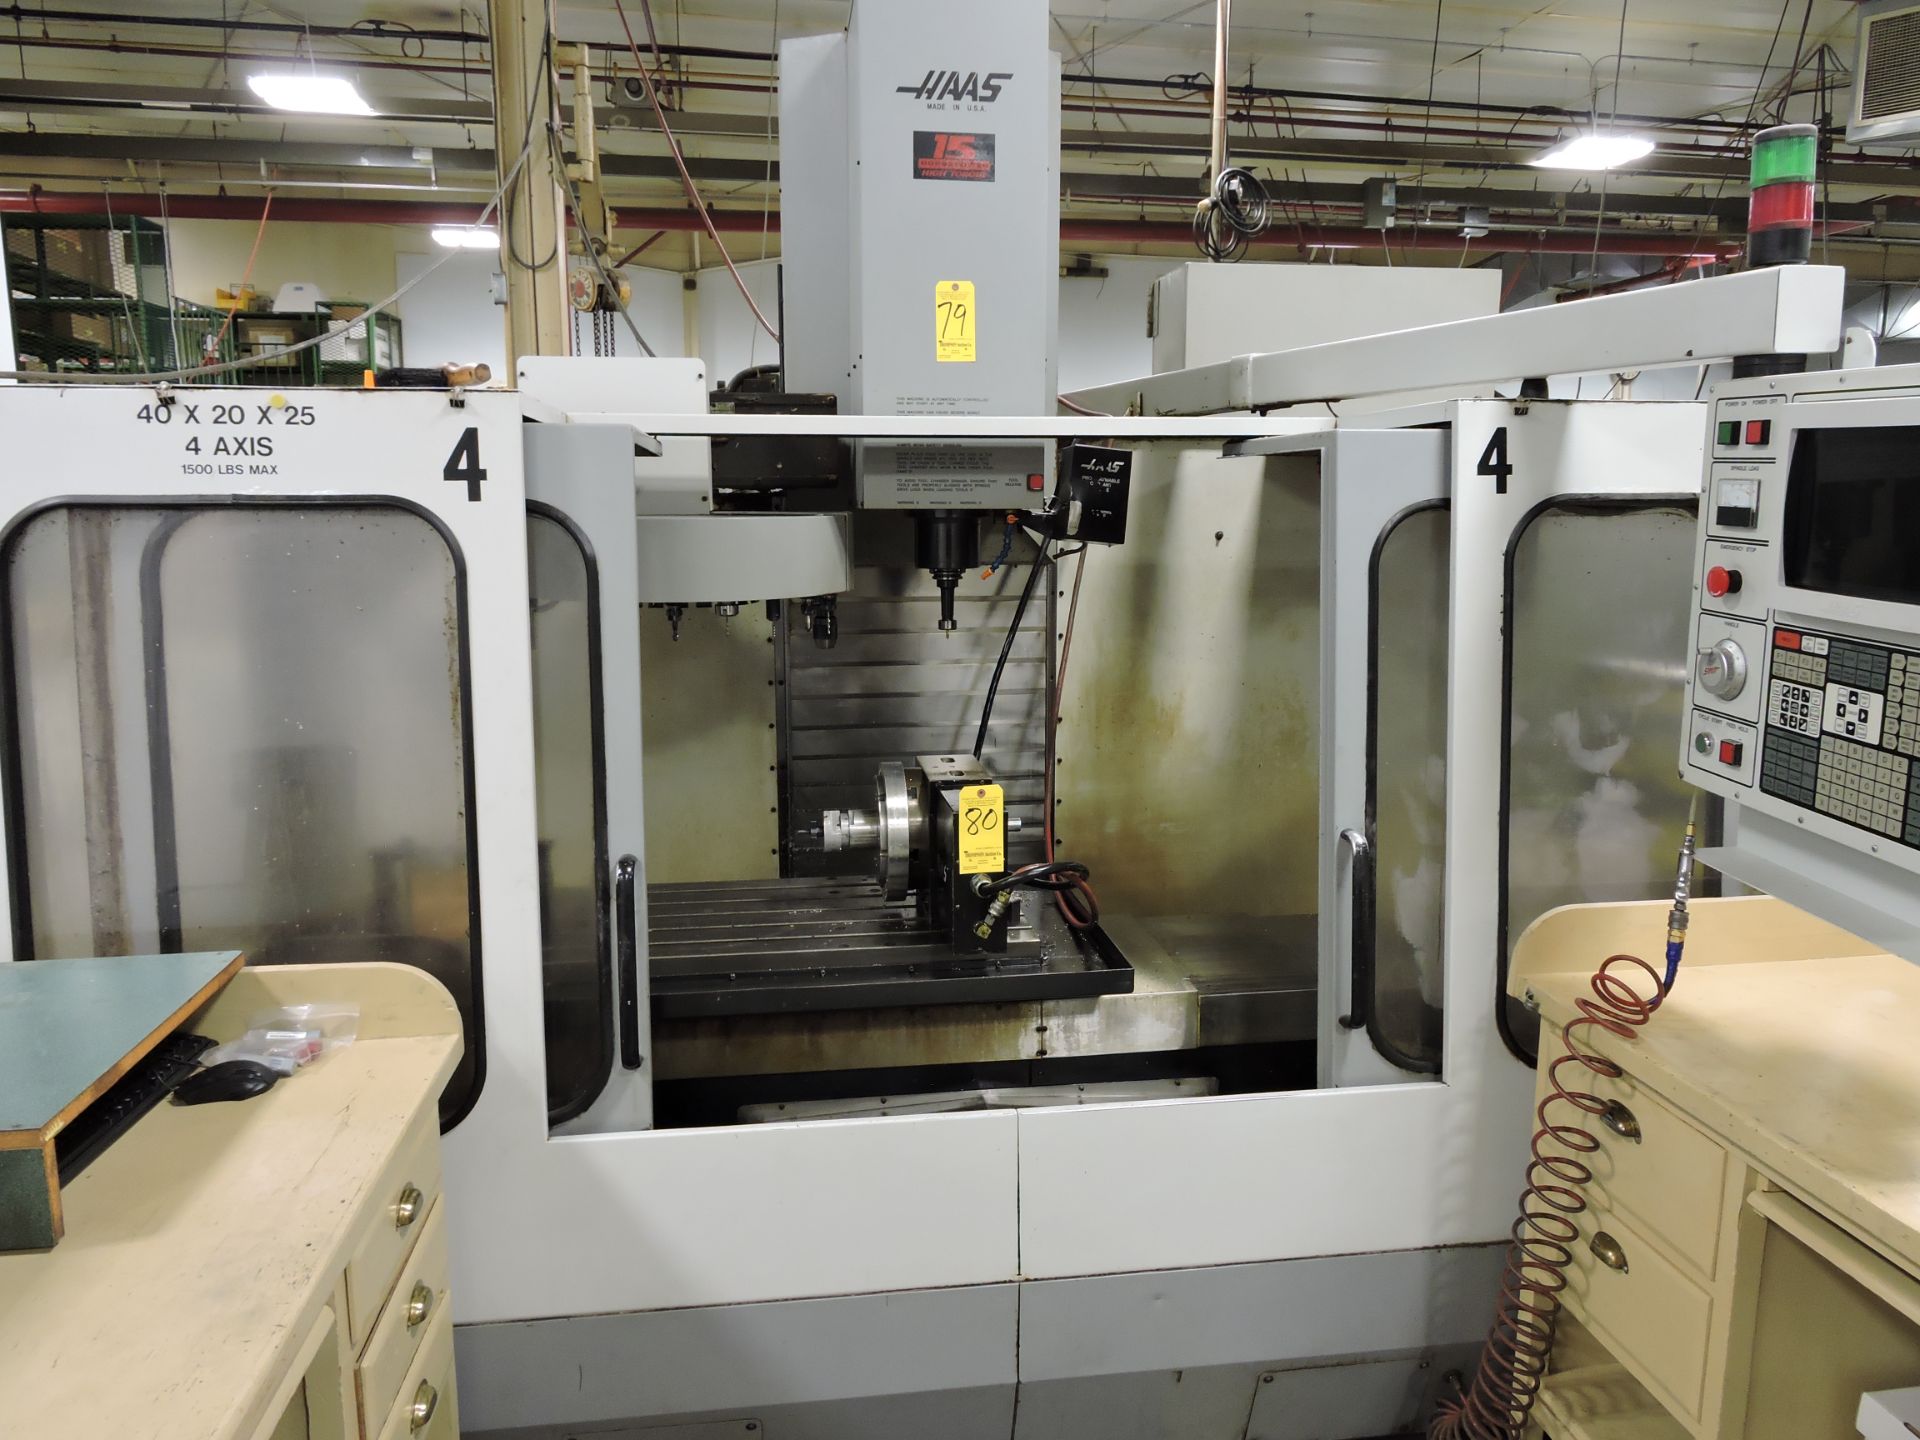 Haas VF-3 CNC Vertical Machining Center, SN 3626, New in 1998, 40" x 20" x 25", 40 Taper, 20 ATC,